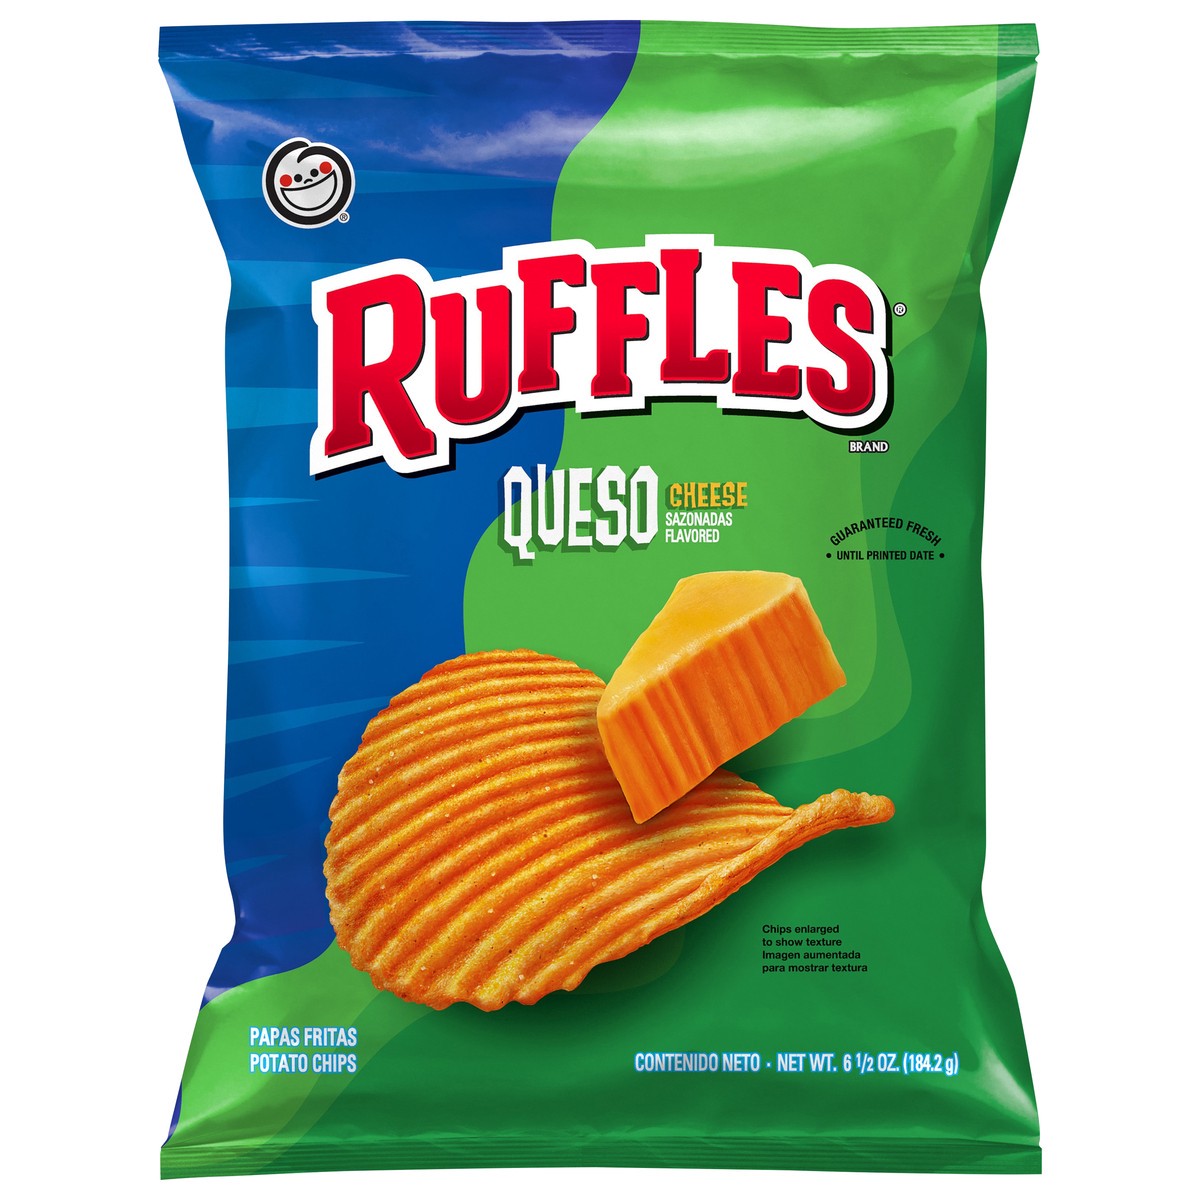 slide 1 of 6, Ruffles Queso Cheese Flavored Potato Chips 6.5 oz, 6.5 oz